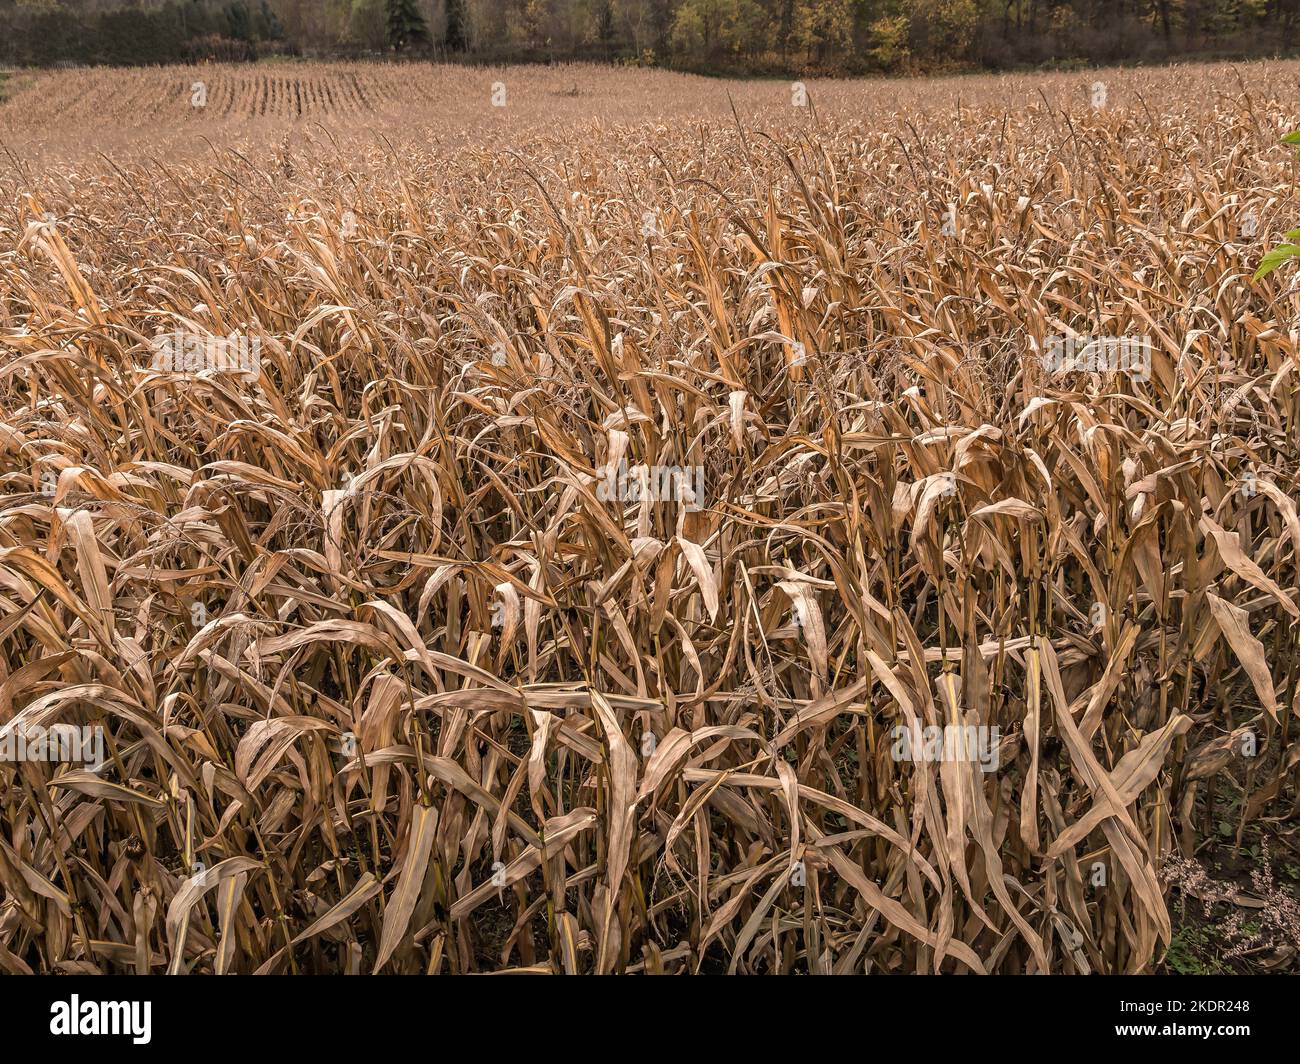 Ripe and dry cornfield ready for harvesting Stock Photo